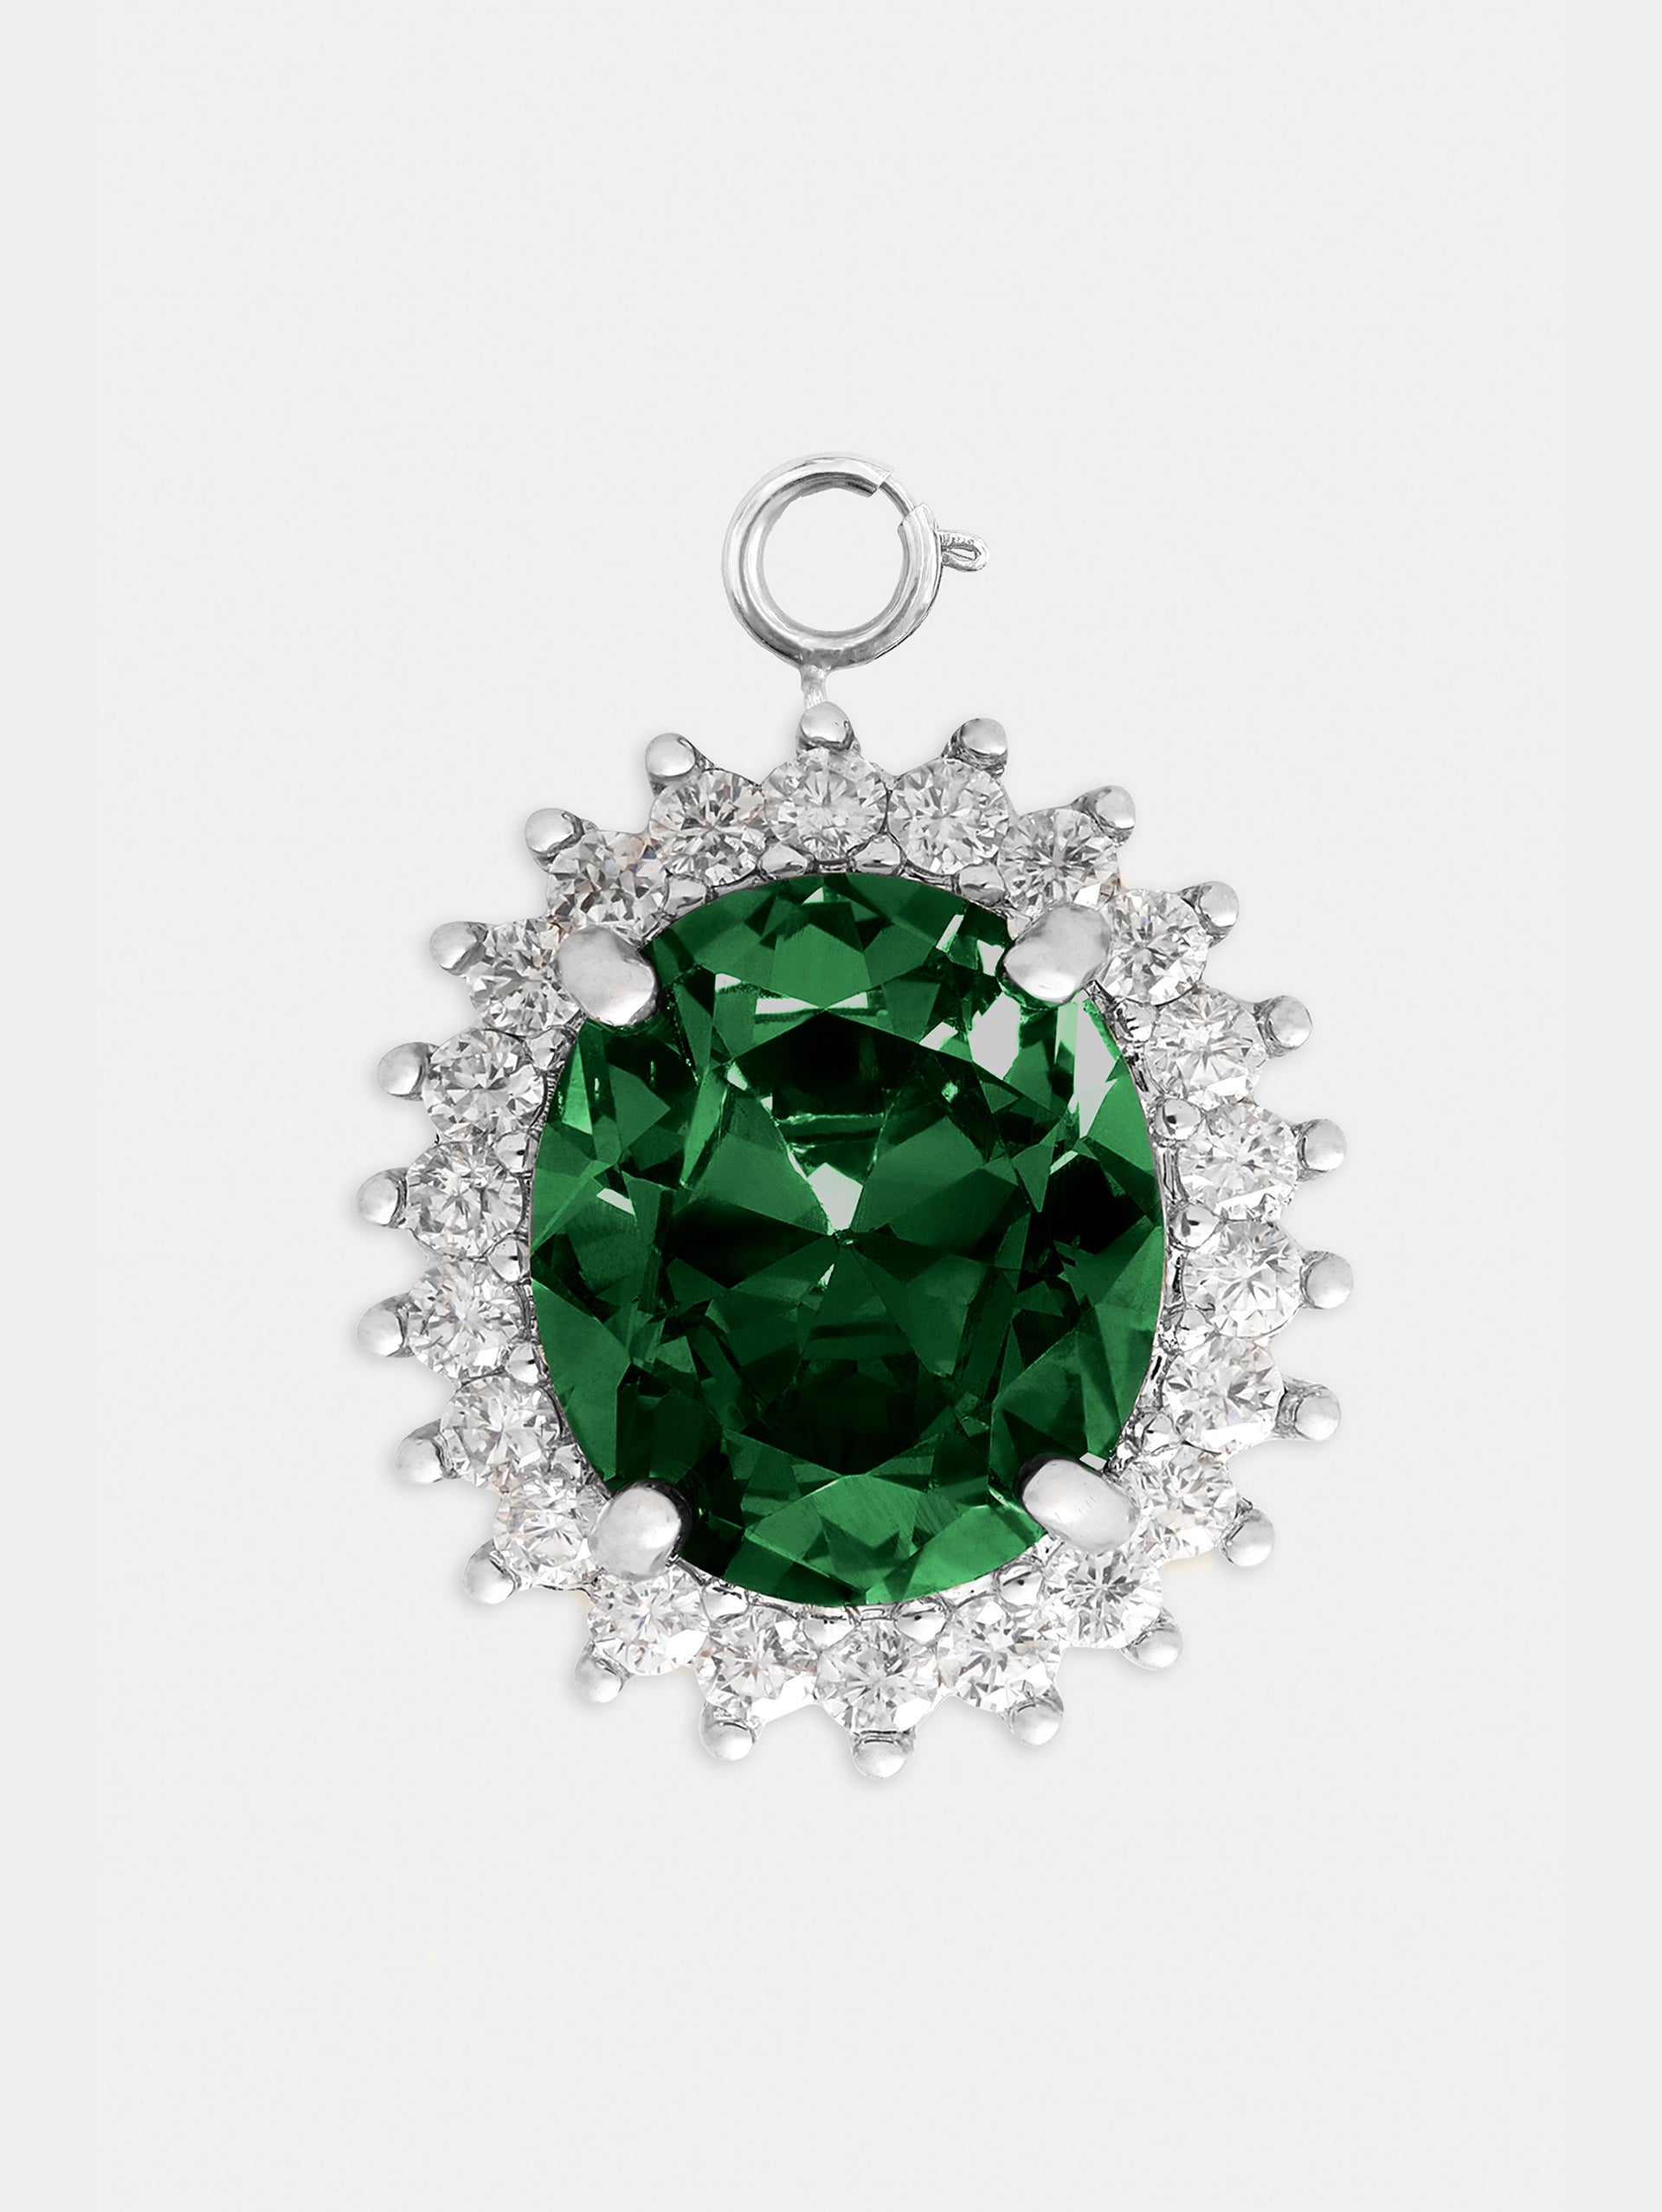 Oval charm with green crystal